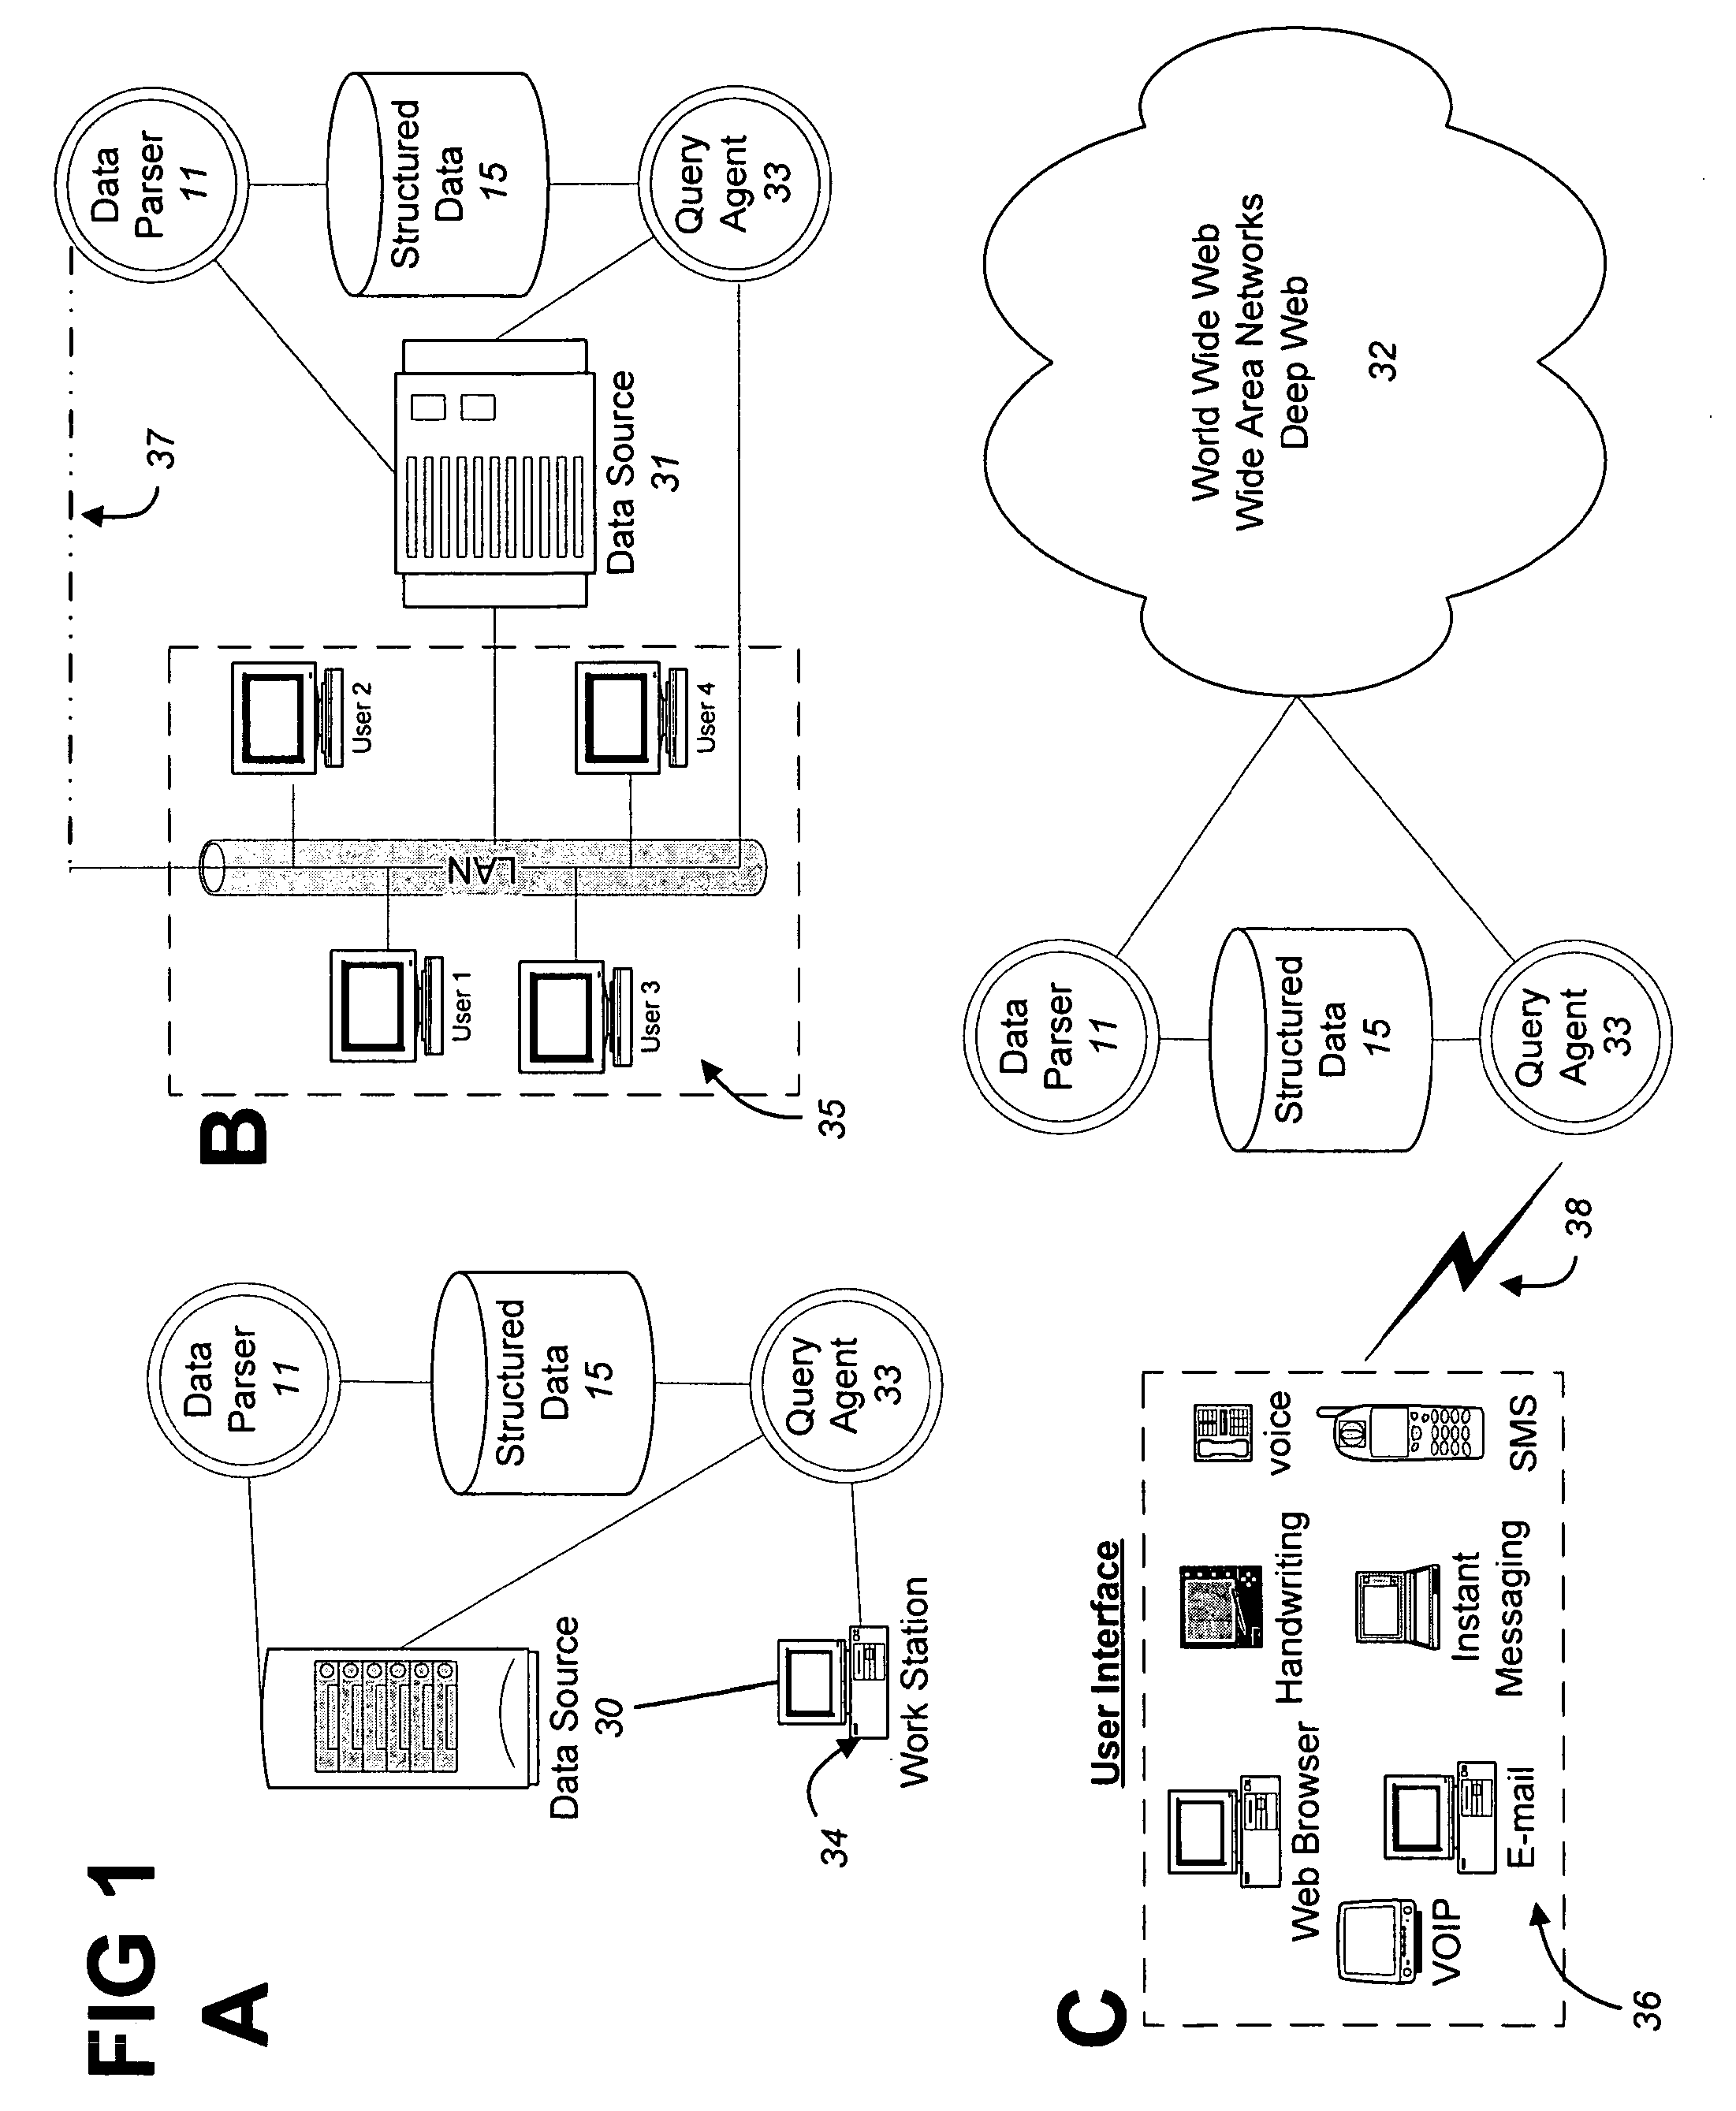 Novel systems and methods for transmitting syntactically accurate messages over a network